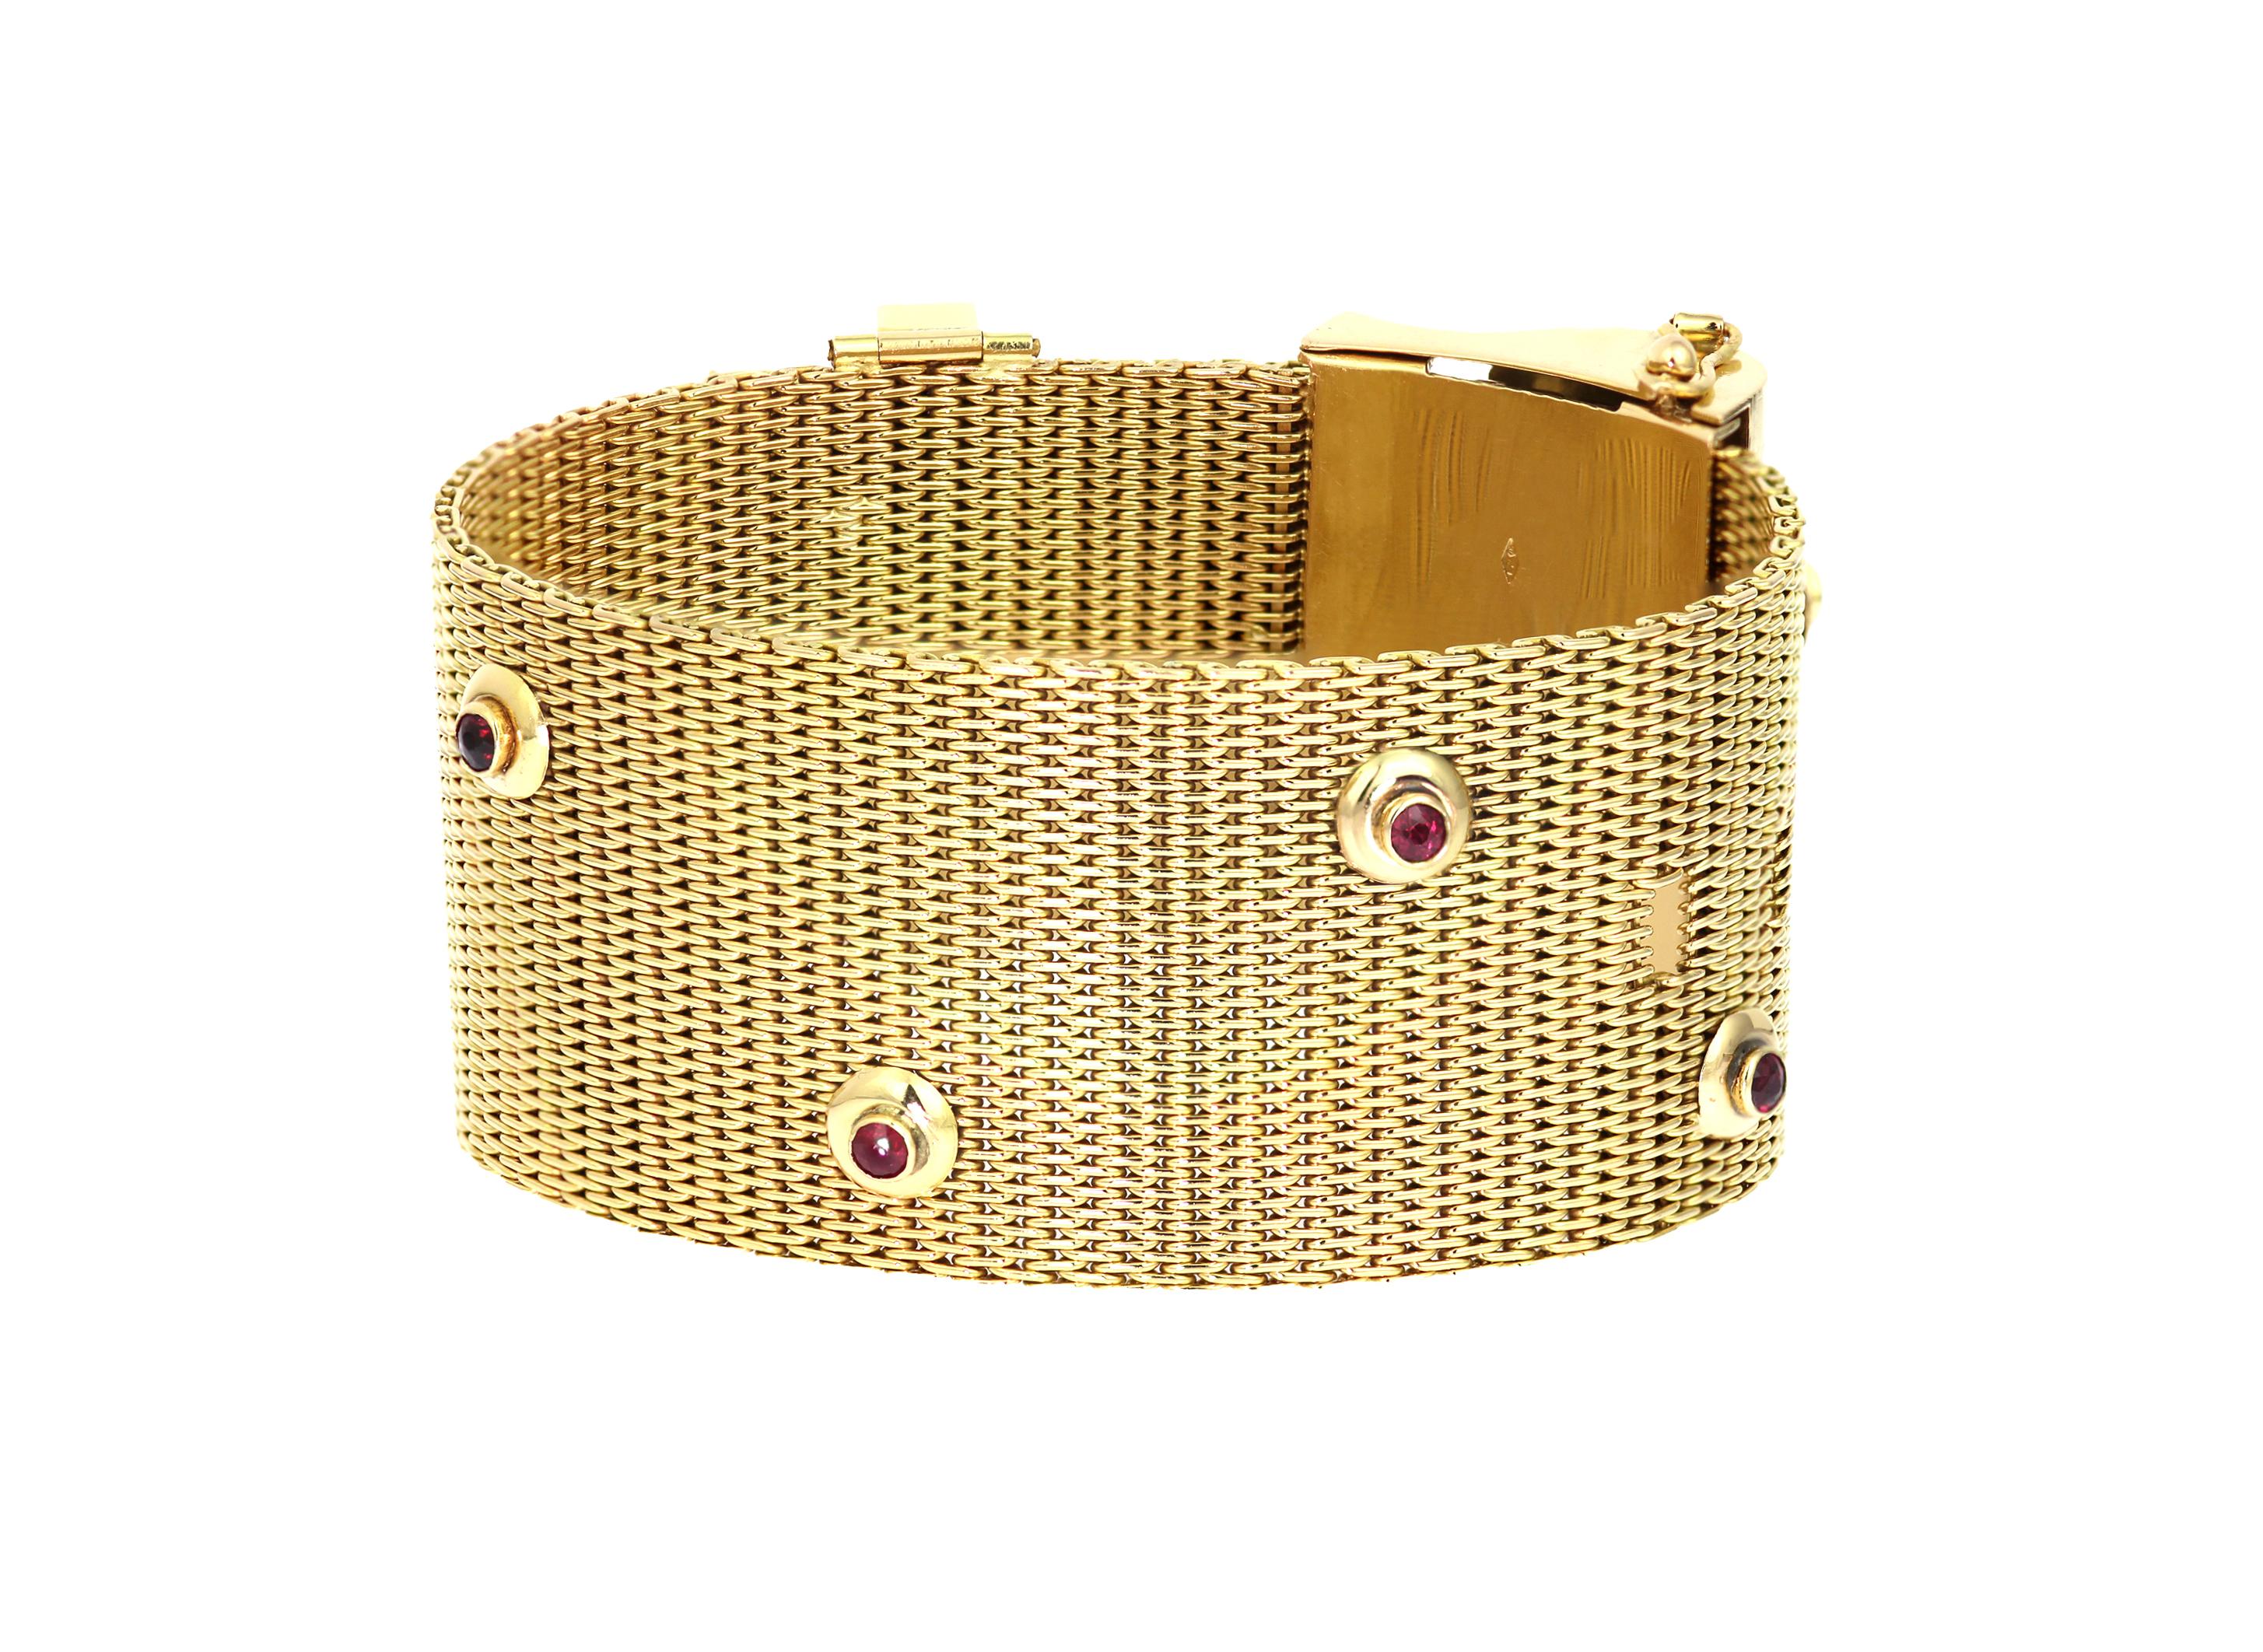 Vintage/Retro Bracelet: Intricate Mesh Buckle Design in 18K Gold, Ruby & Diamond In Excellent Condition For Sale In London, GB